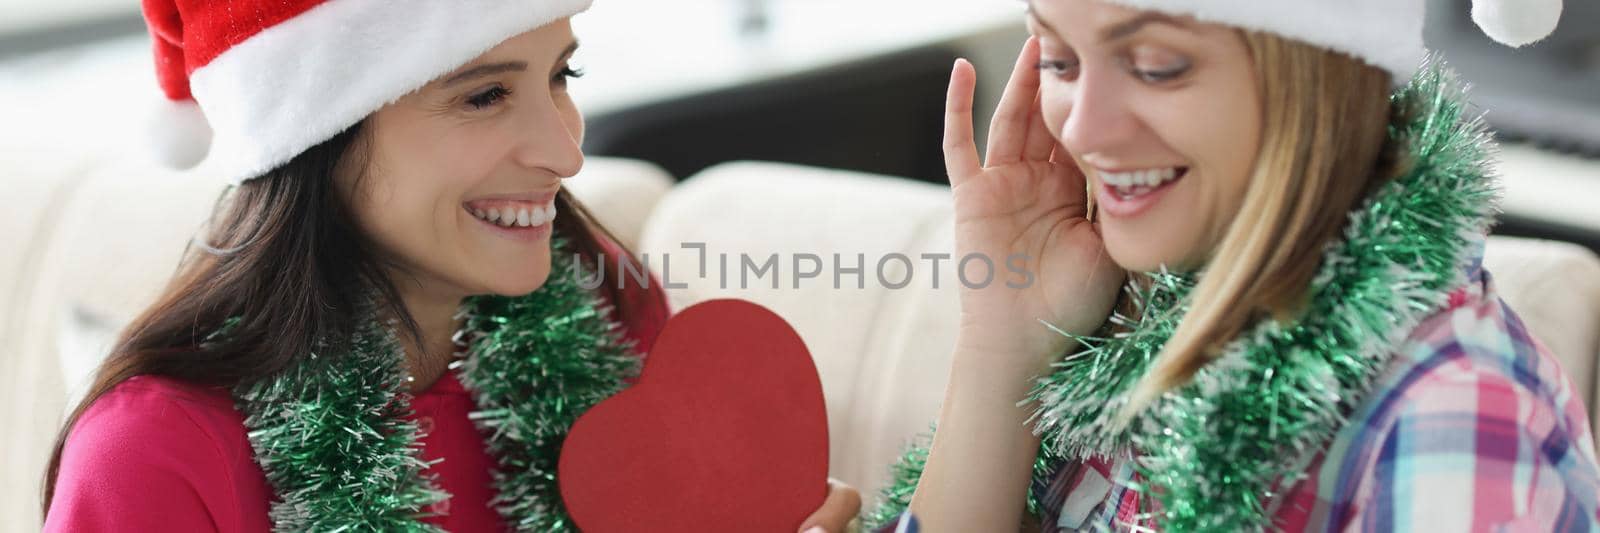 Portrait of woman got present smartphone from sister in heart shaped box. Happy woman shocked and cheerful at same time. New year, christmas, fun concept